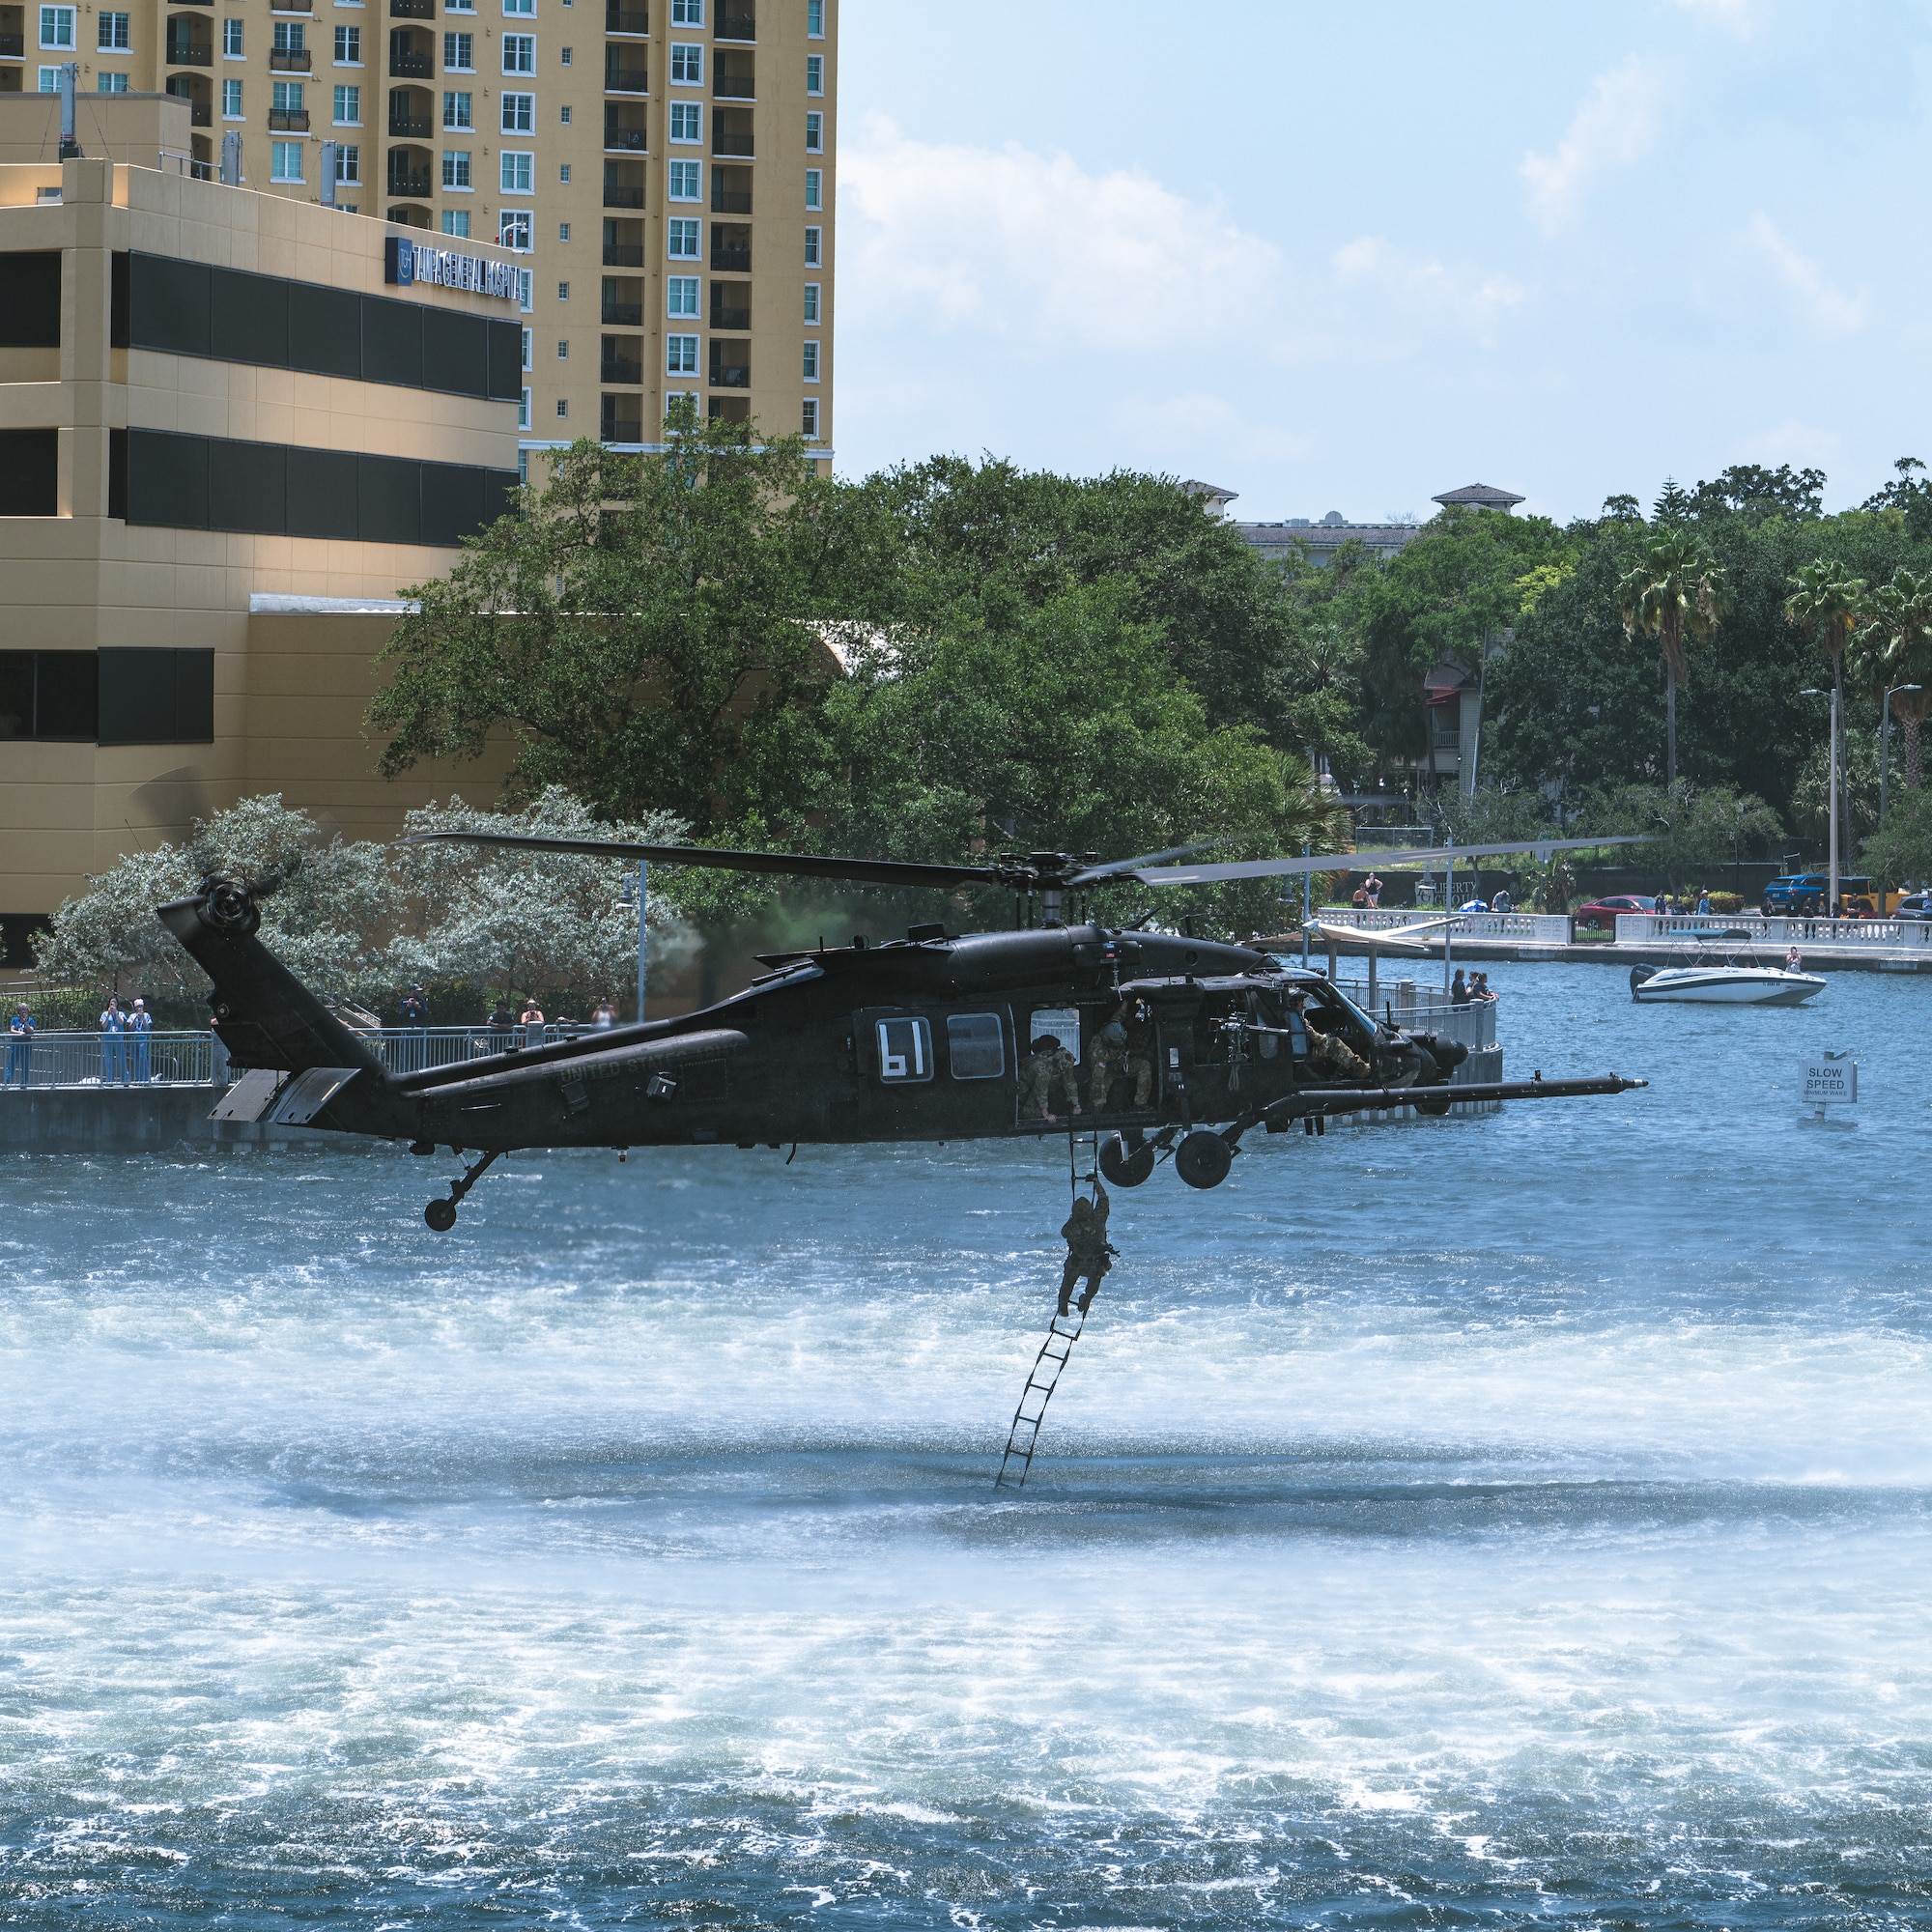 Members assigned to U.S. Special Operations Command execute a simulated rescue mission during a Special Operations Forces (SOF) demonstration in Downtown Tampa, Florida, May 18, 2022.